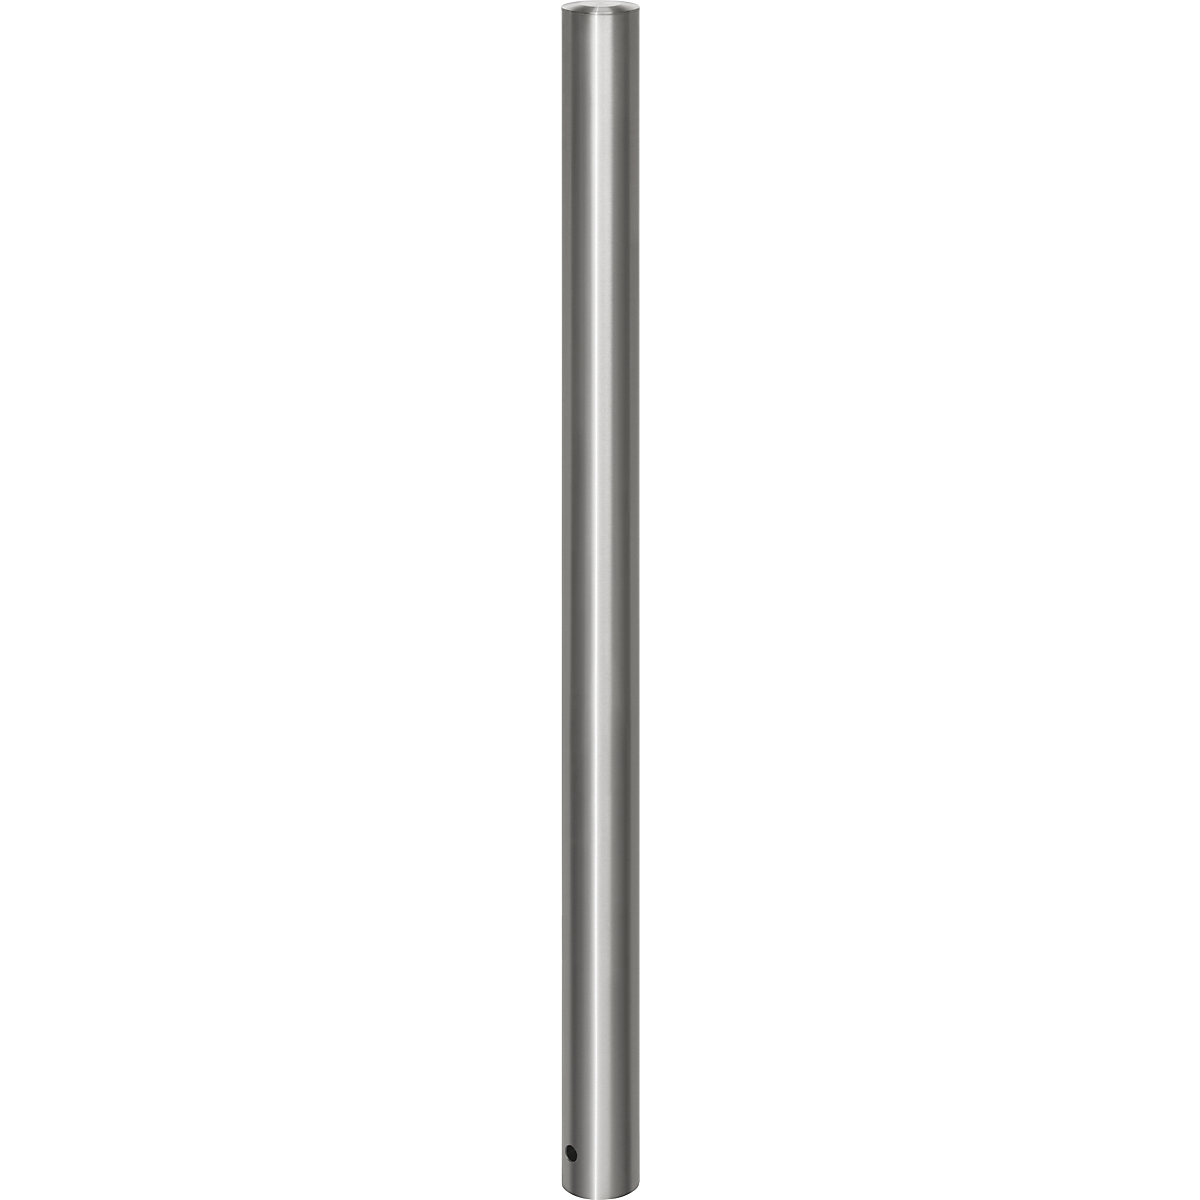 Stainless steel barrier post, with flat head, ground sleeve for concreting in, Ø 76 mm-11